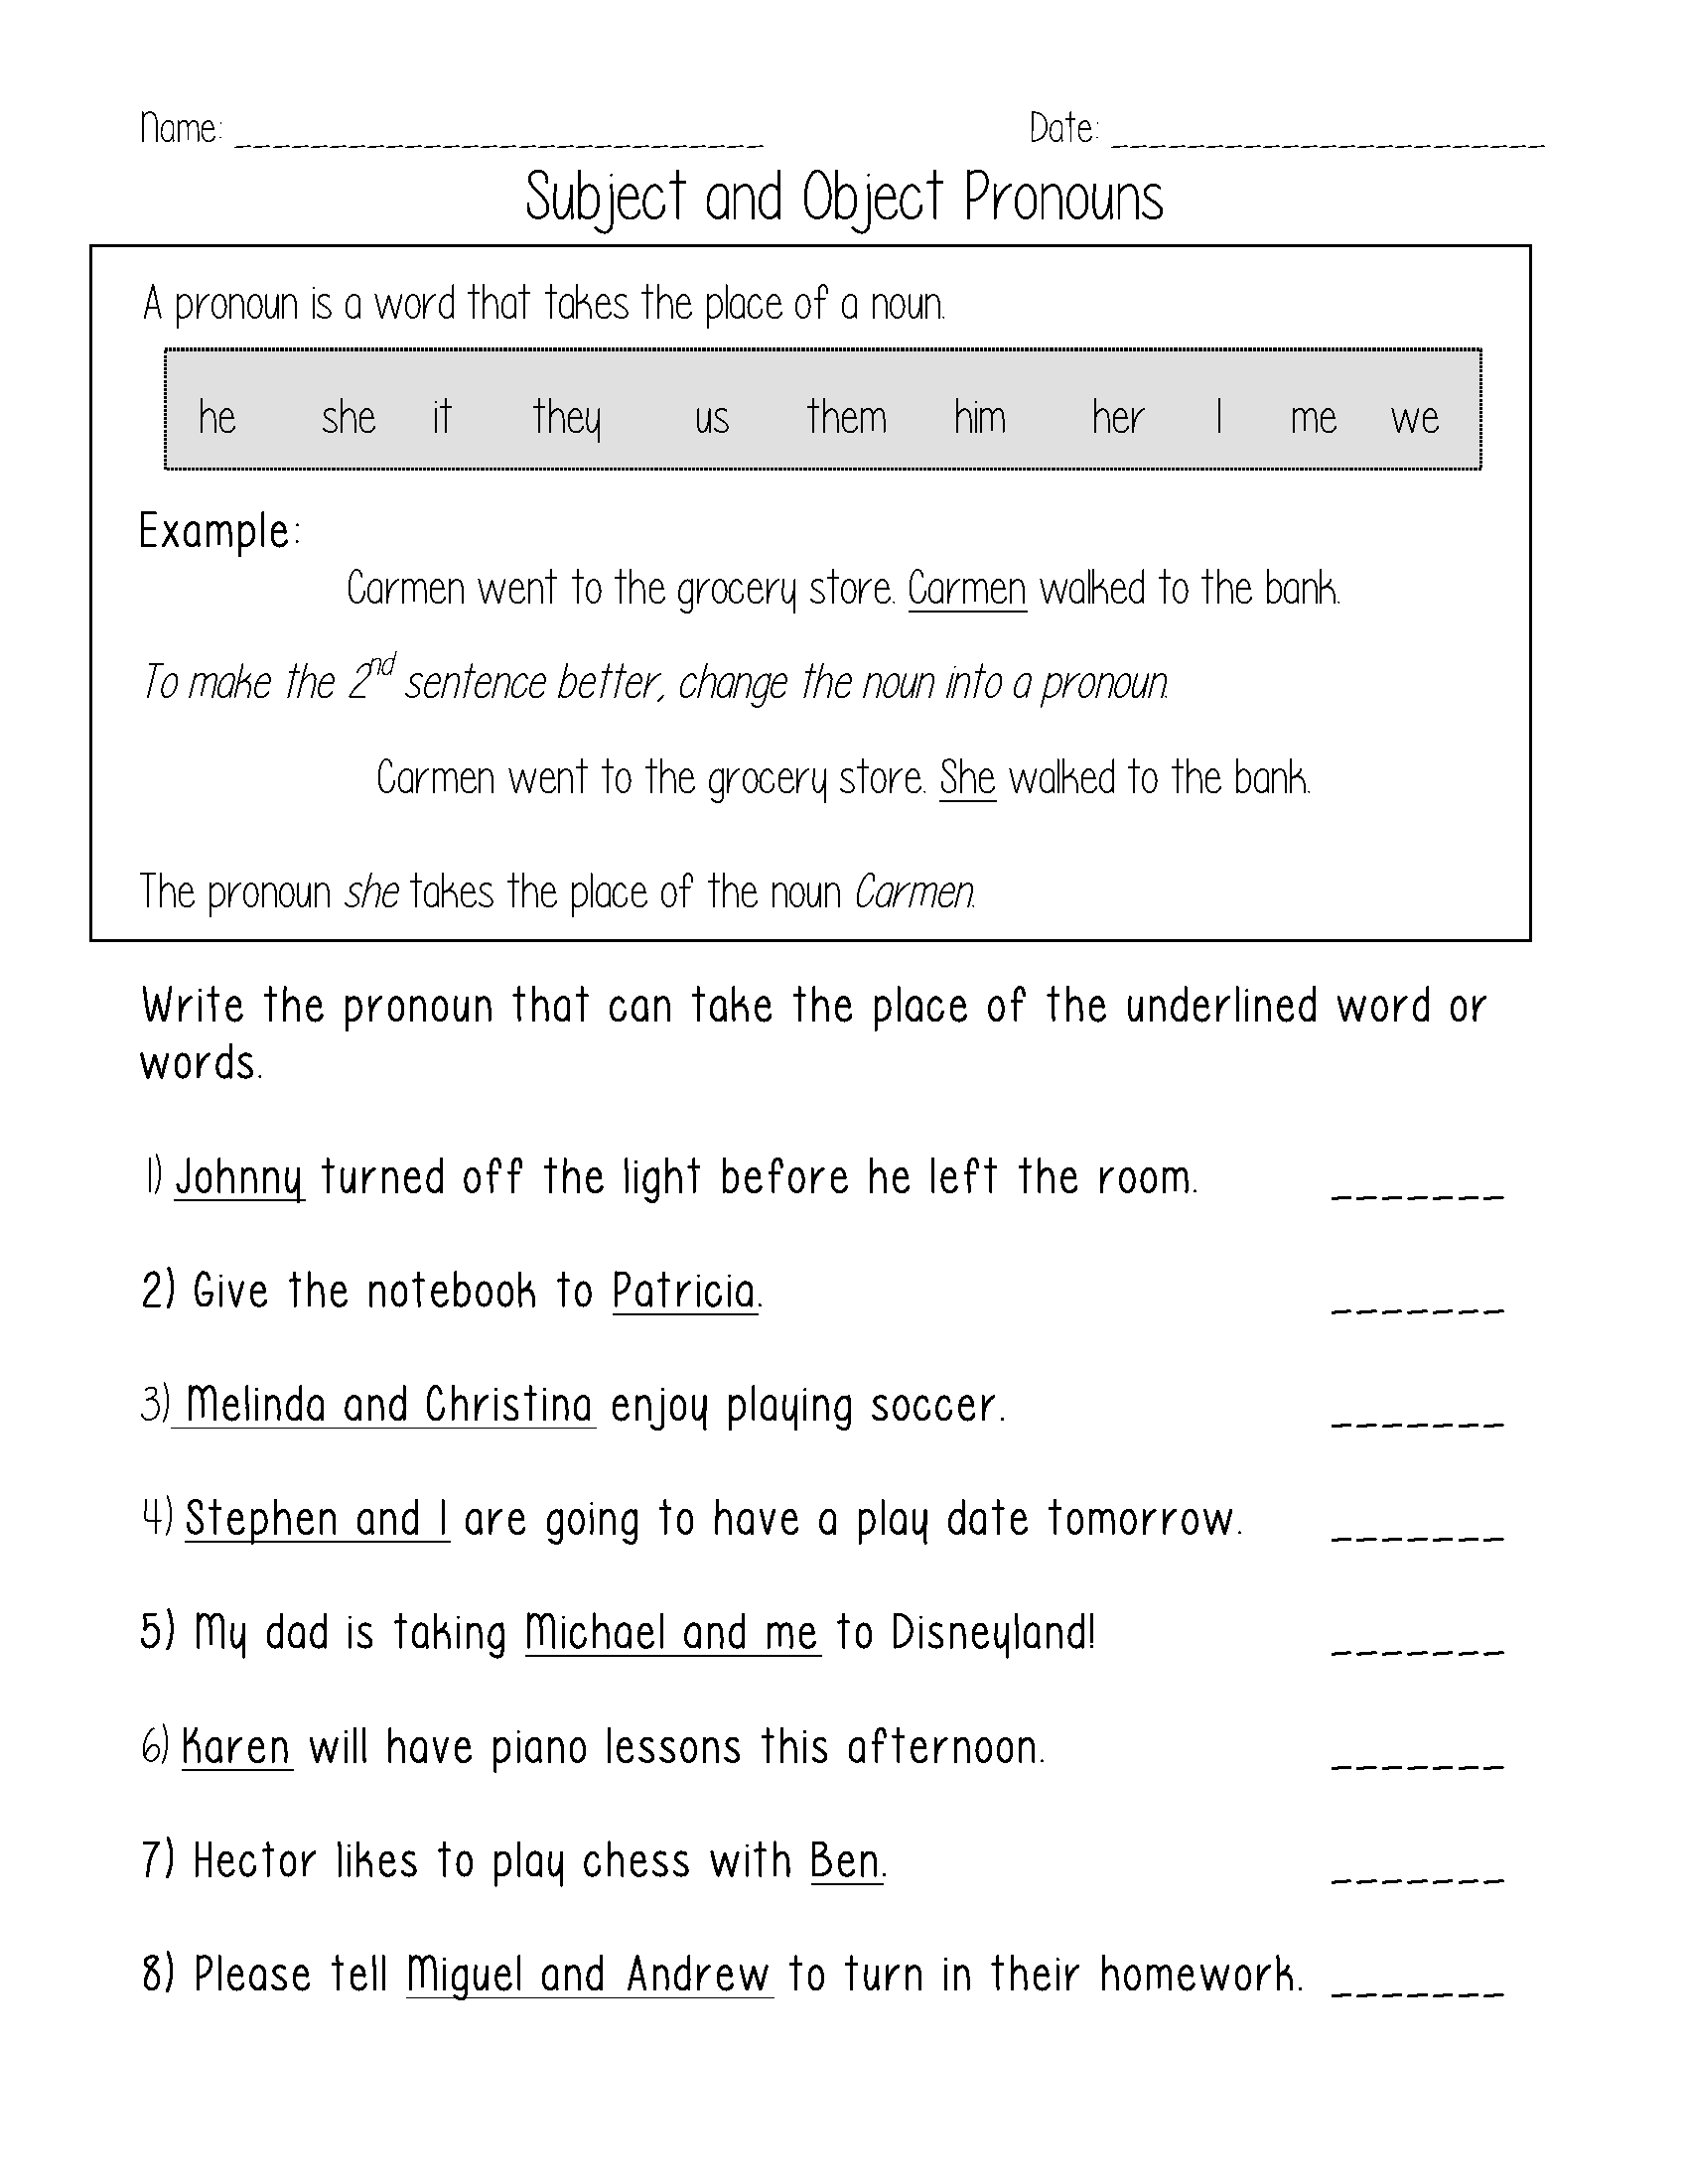 14-best-images-of-pronoun-contractions-worksheet-contractions-printable-worksheets-pronouns